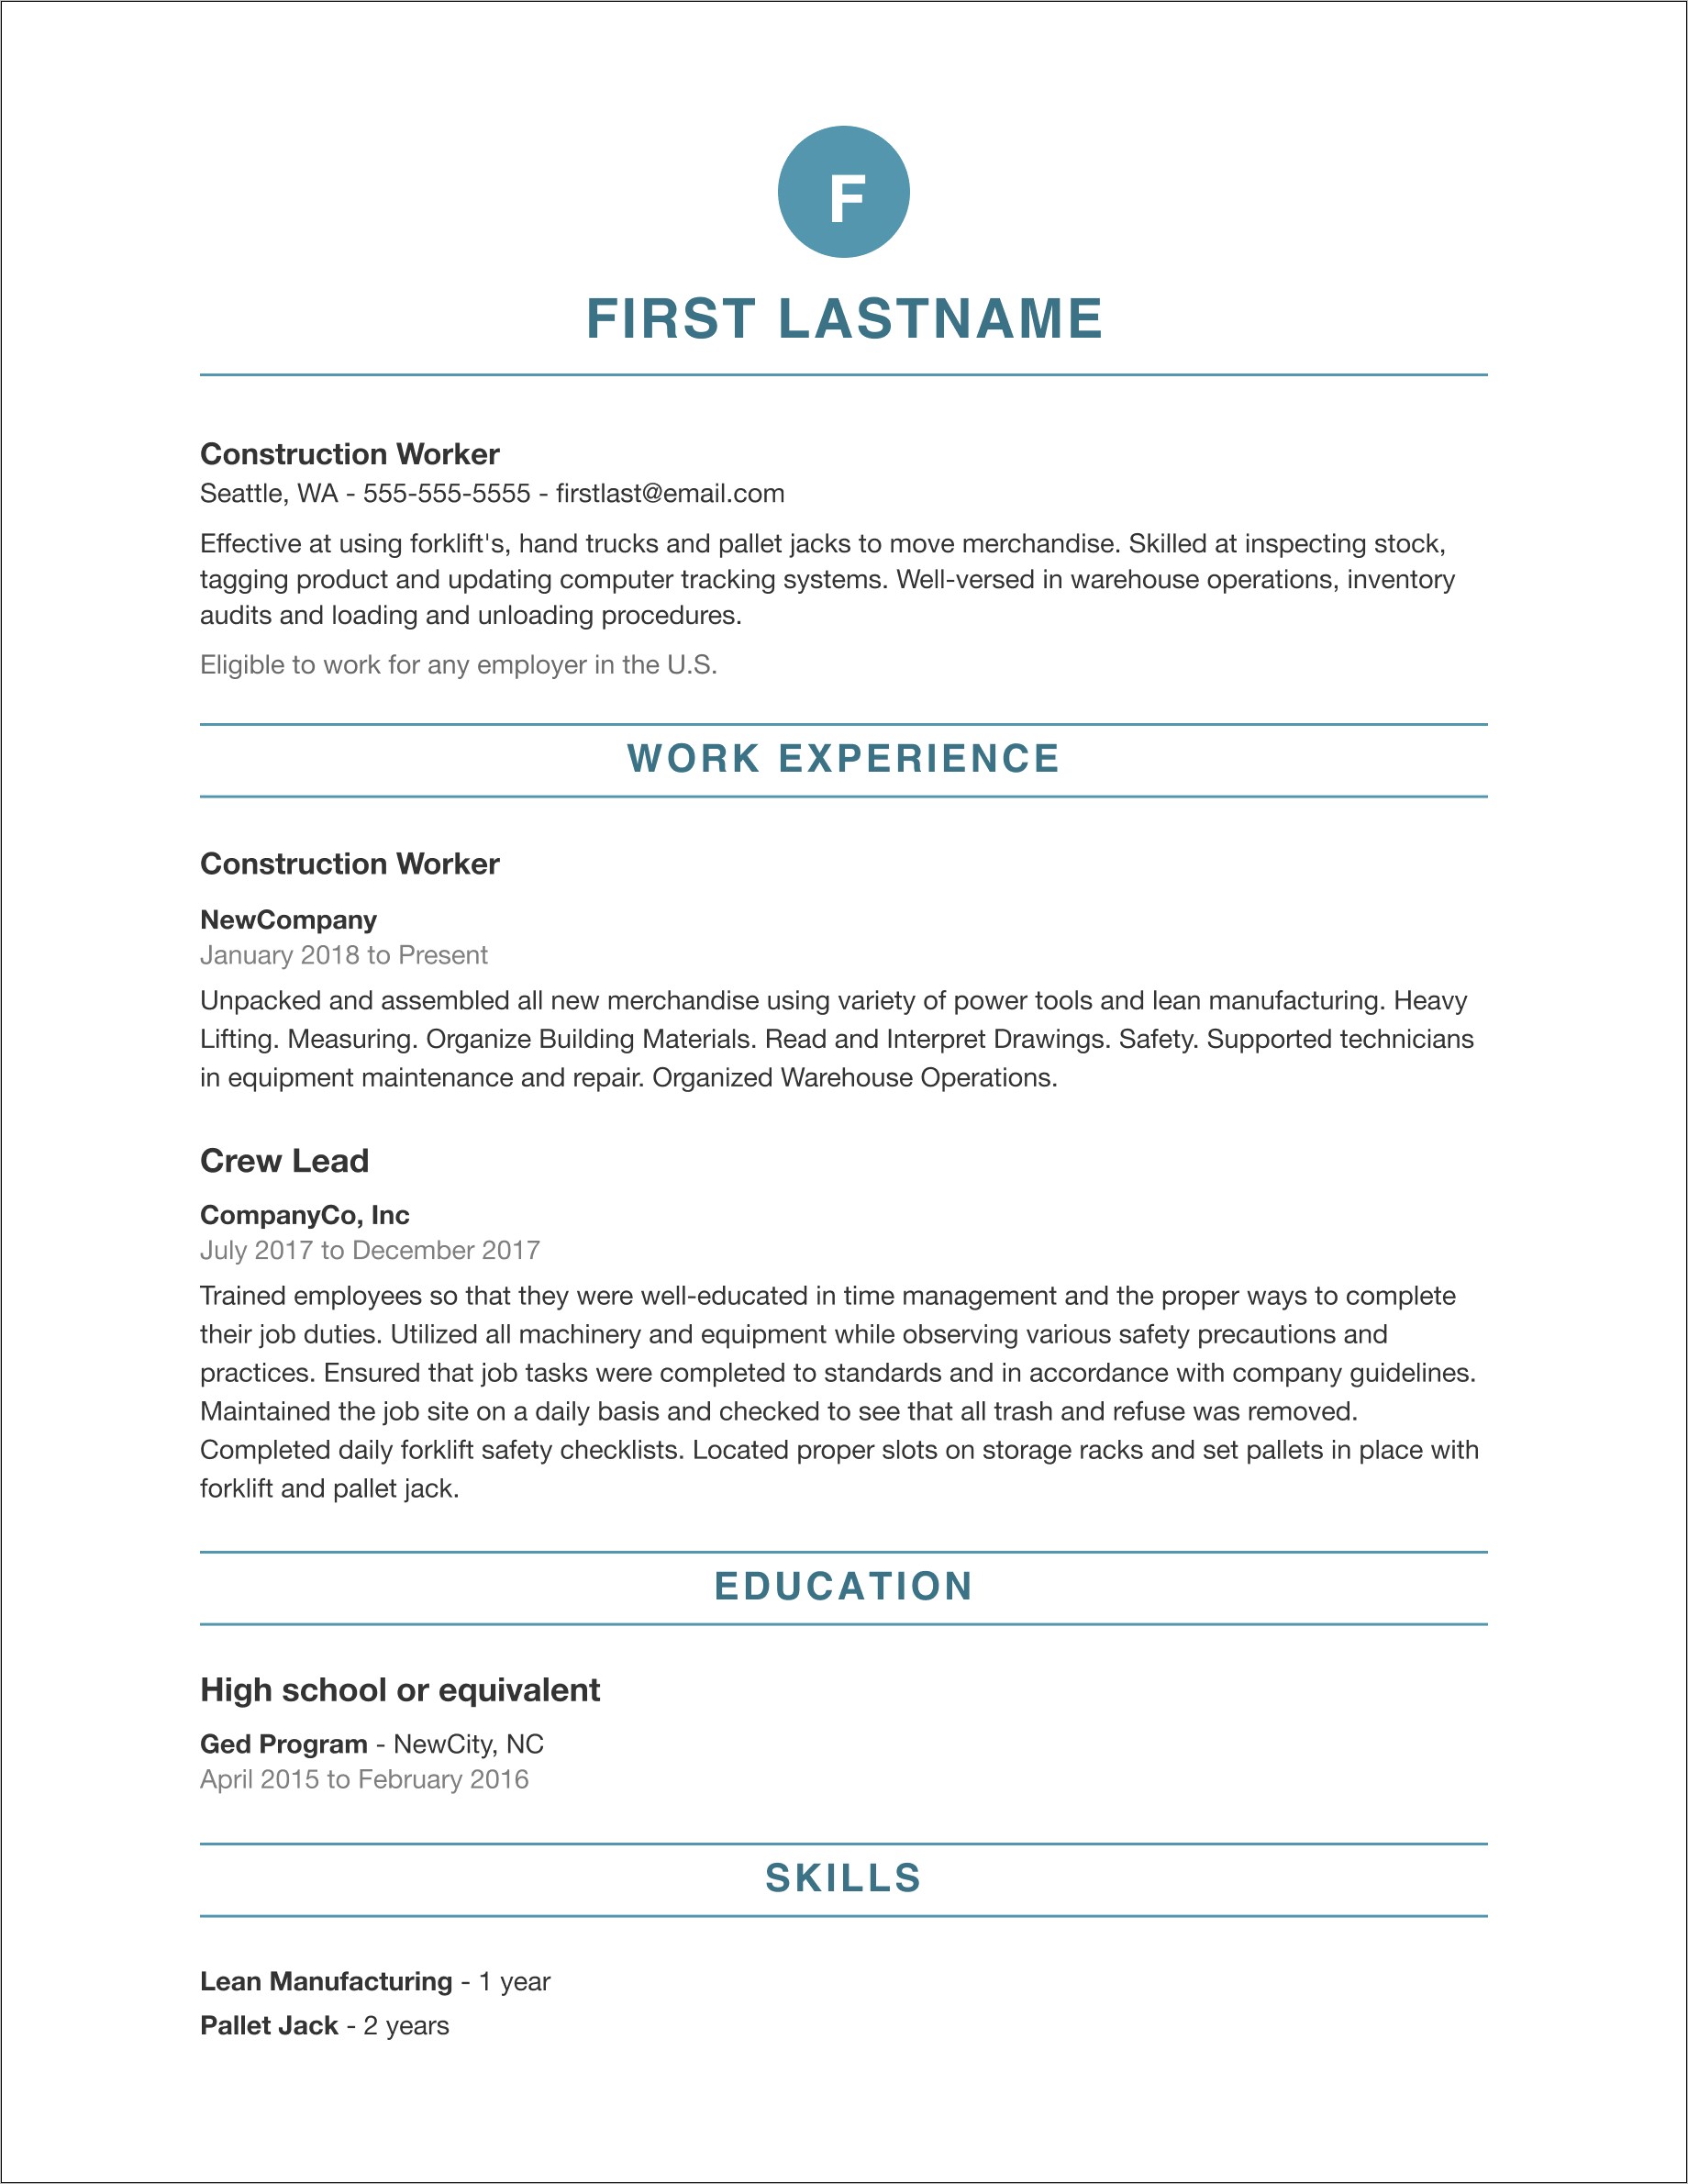 Examples Of Professional Resumes 2018